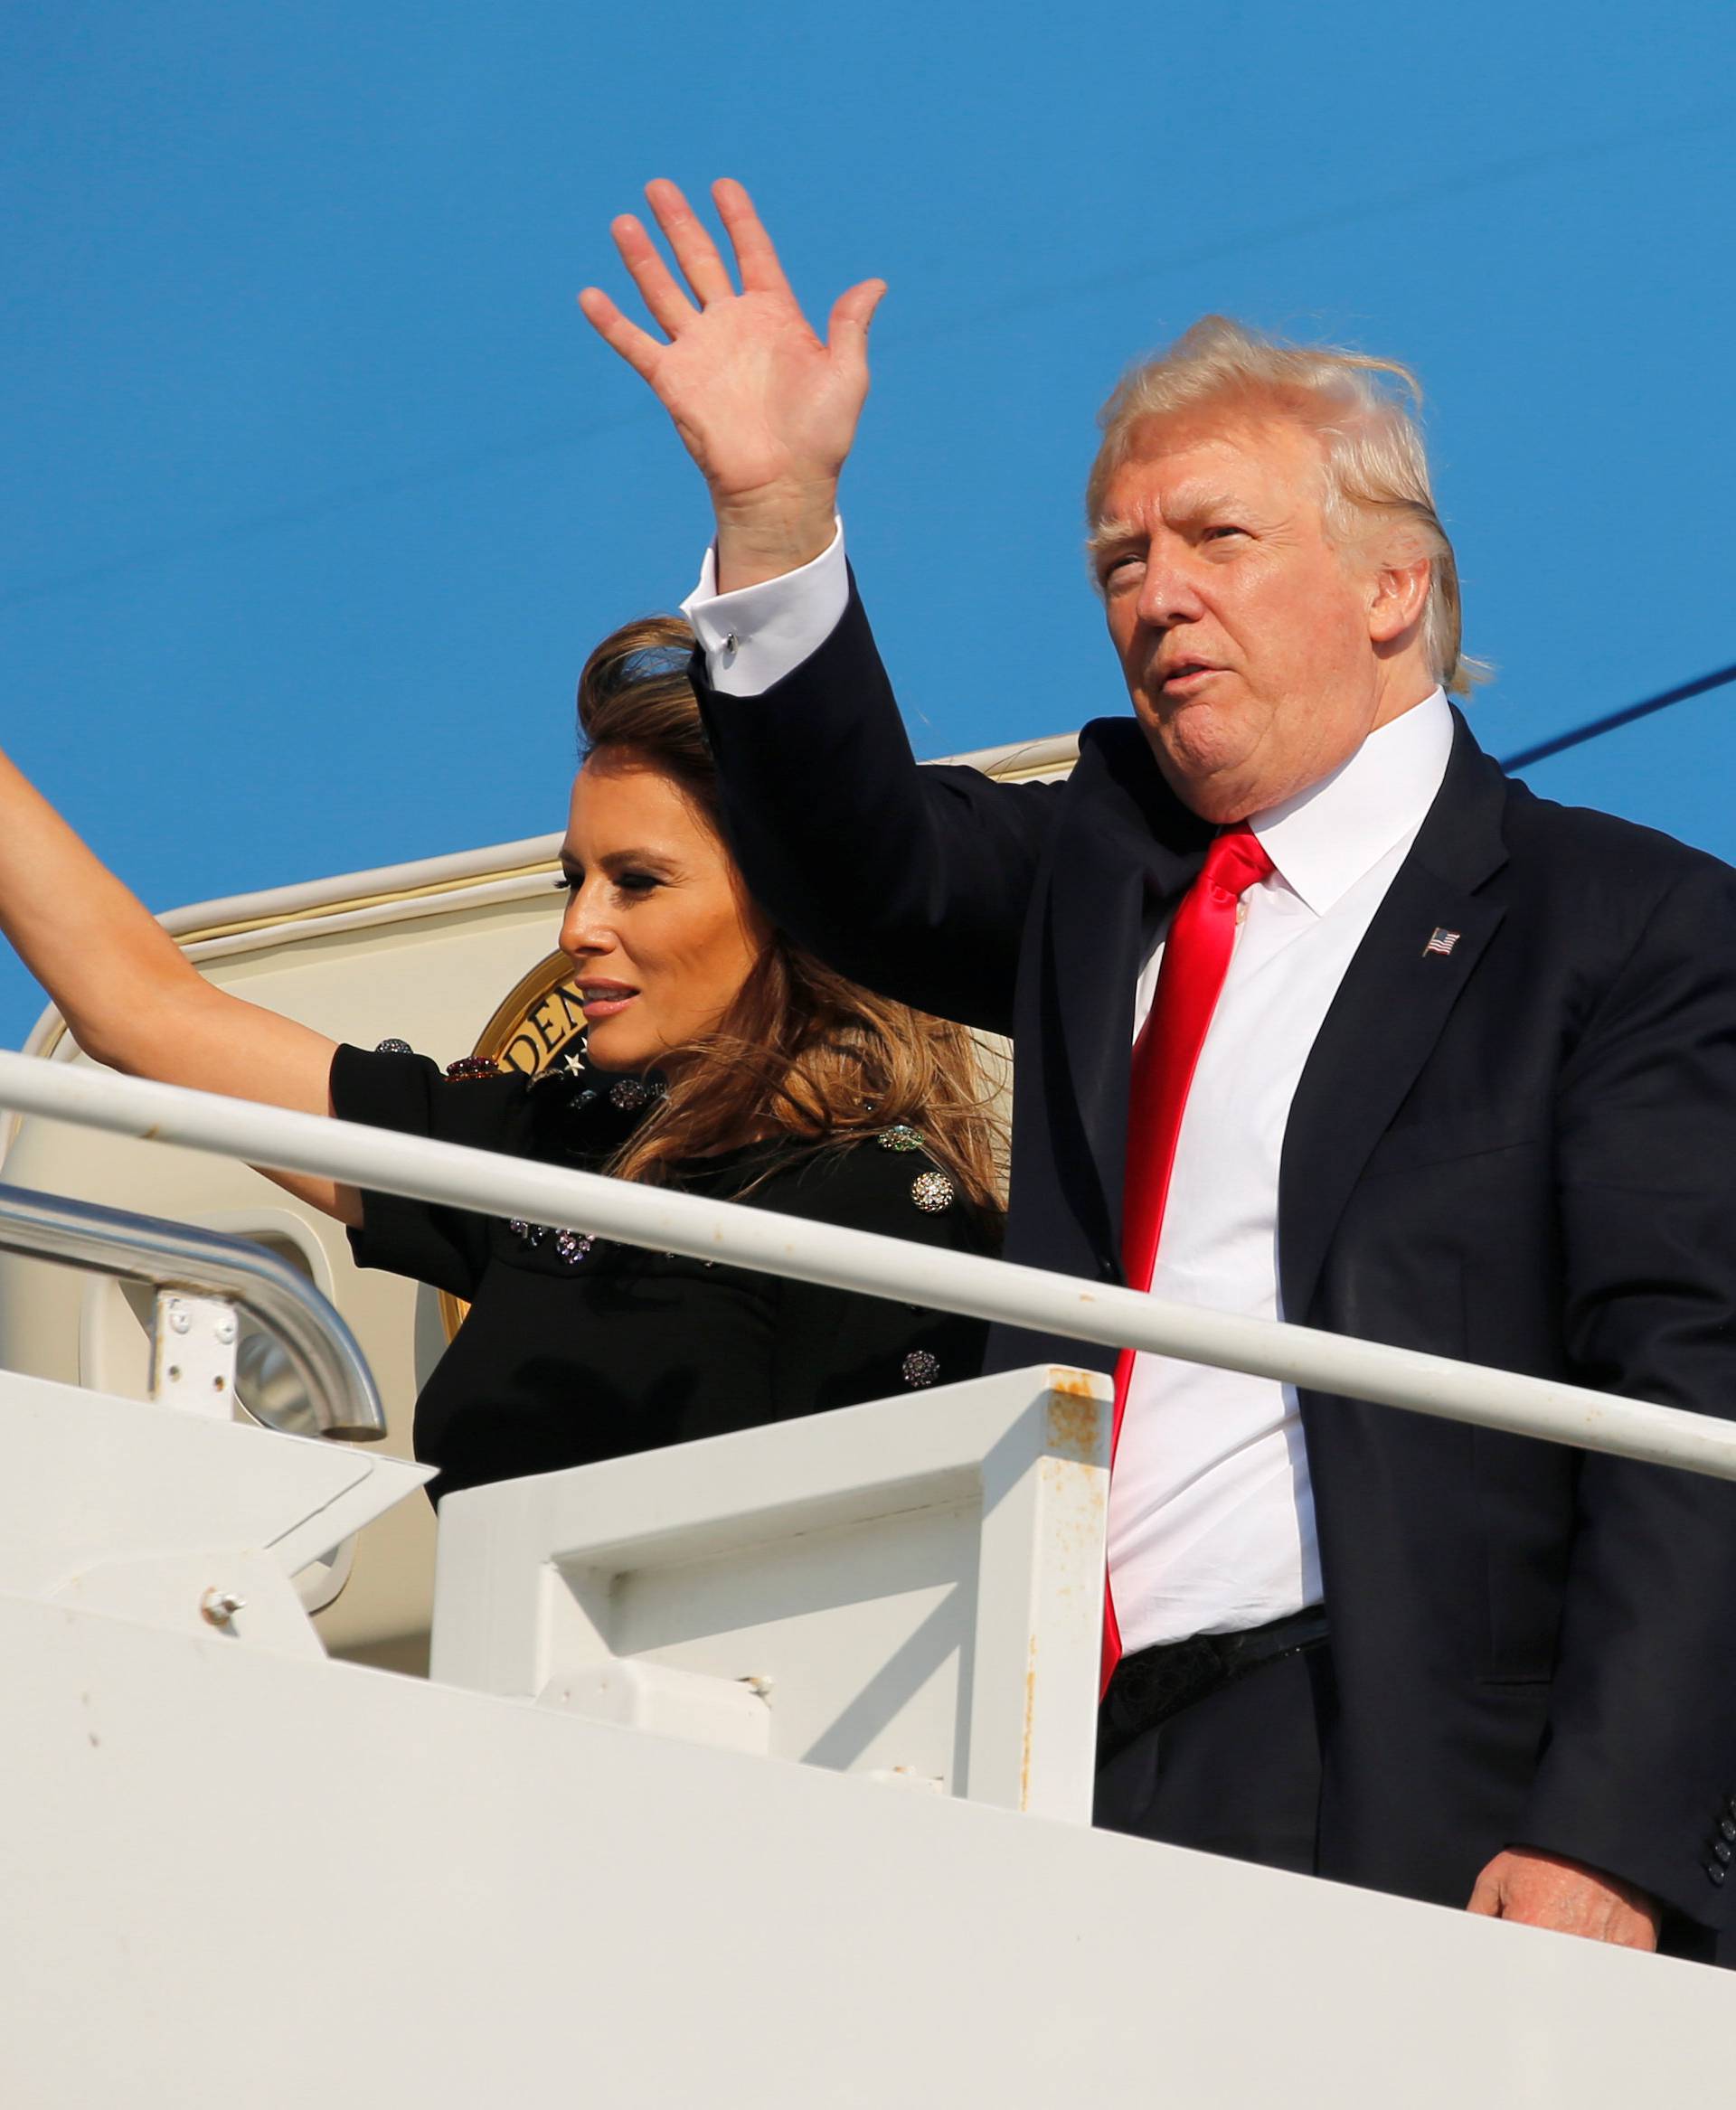 U.S. President Trump and first lady Melania Trump wave outside Air Force One before returning to Washington D.C. at Sigonella Air Force Base in Sigonella